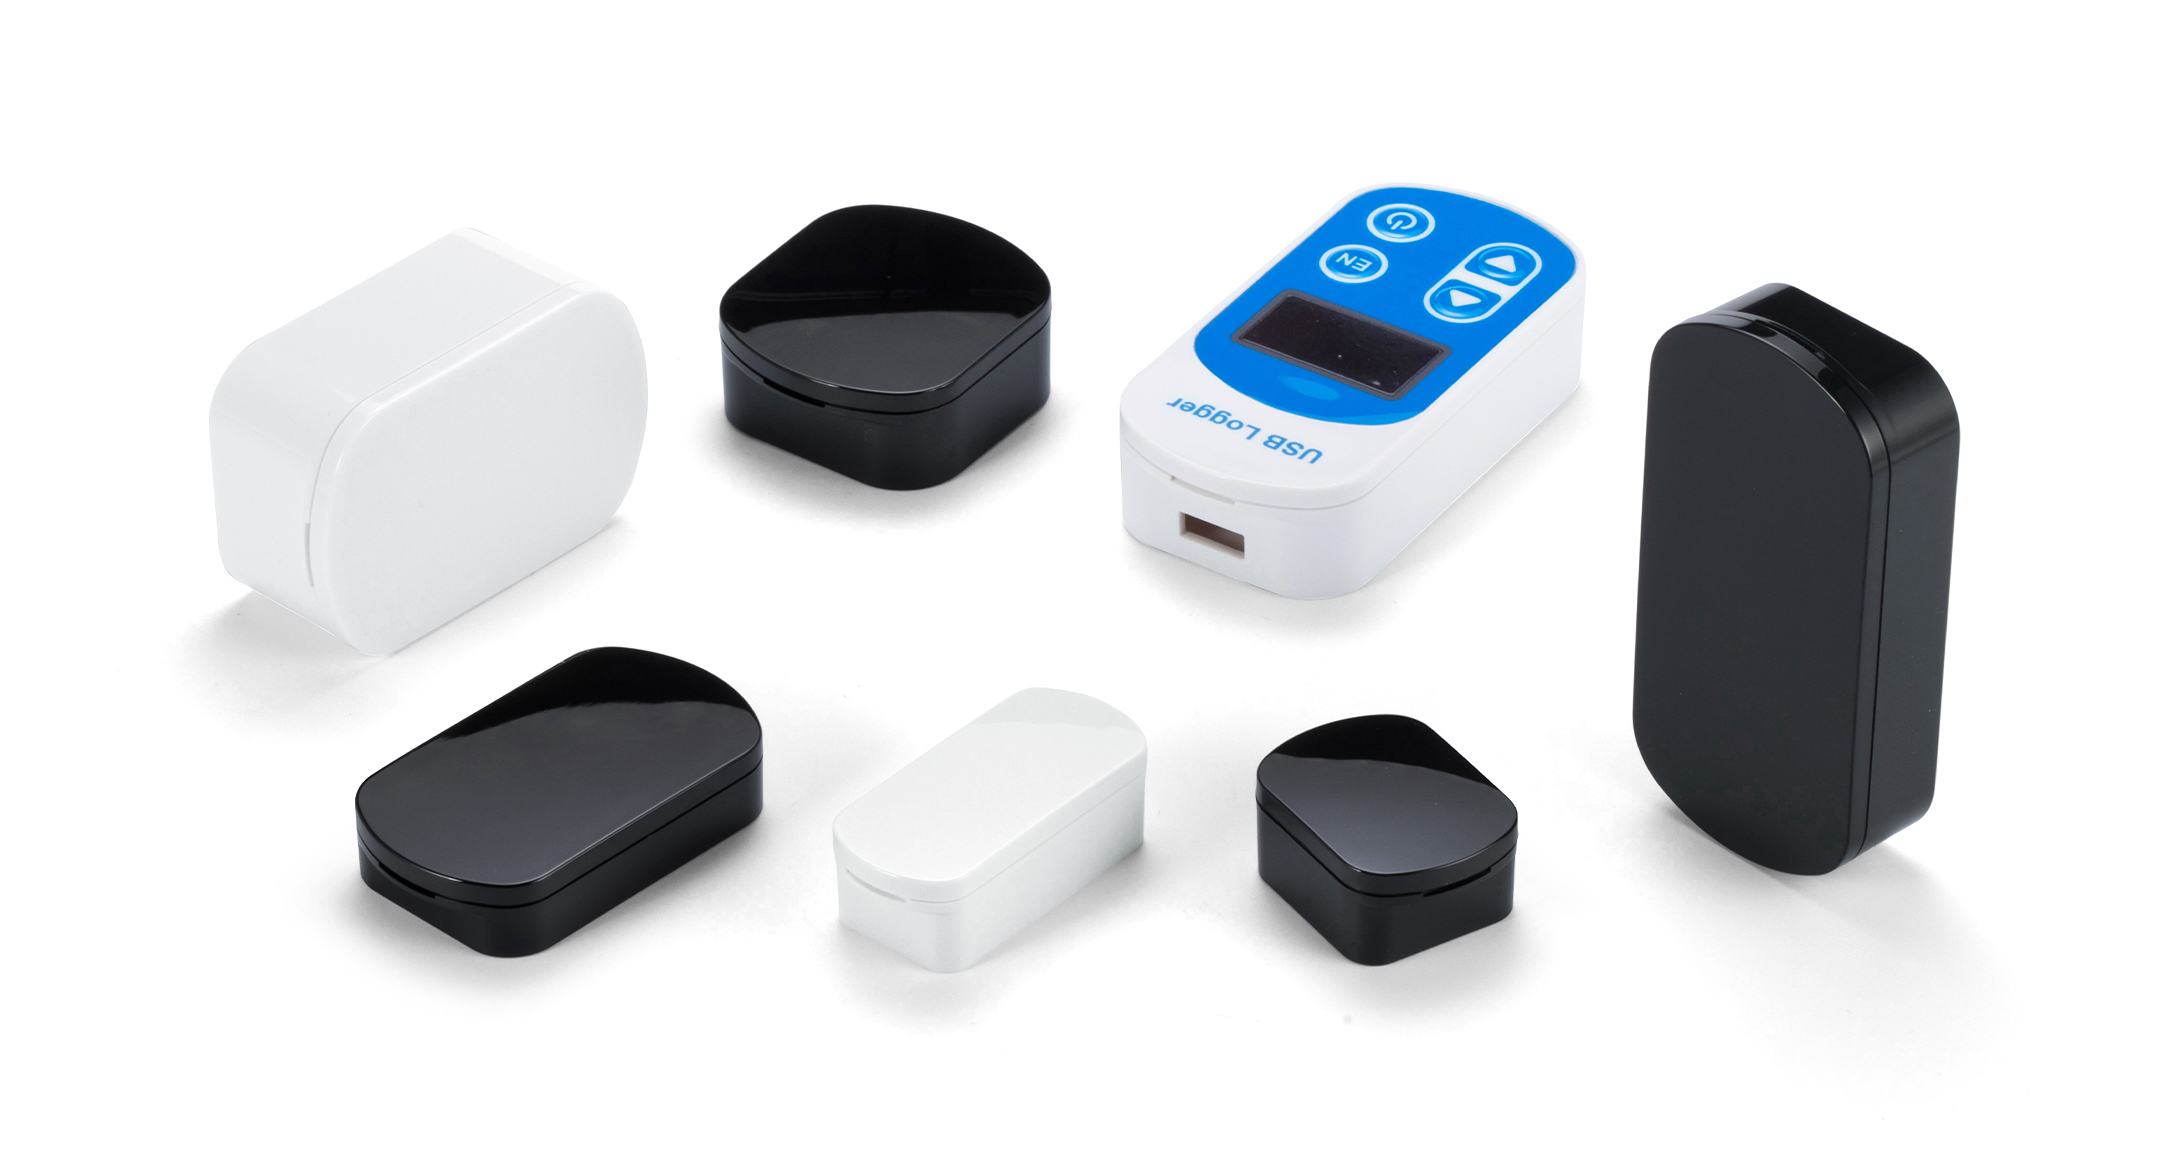 3 NEW SIZES ADDED on SMALL IoT PLASTIC CASE / WALLMOUNT SMALL IoT